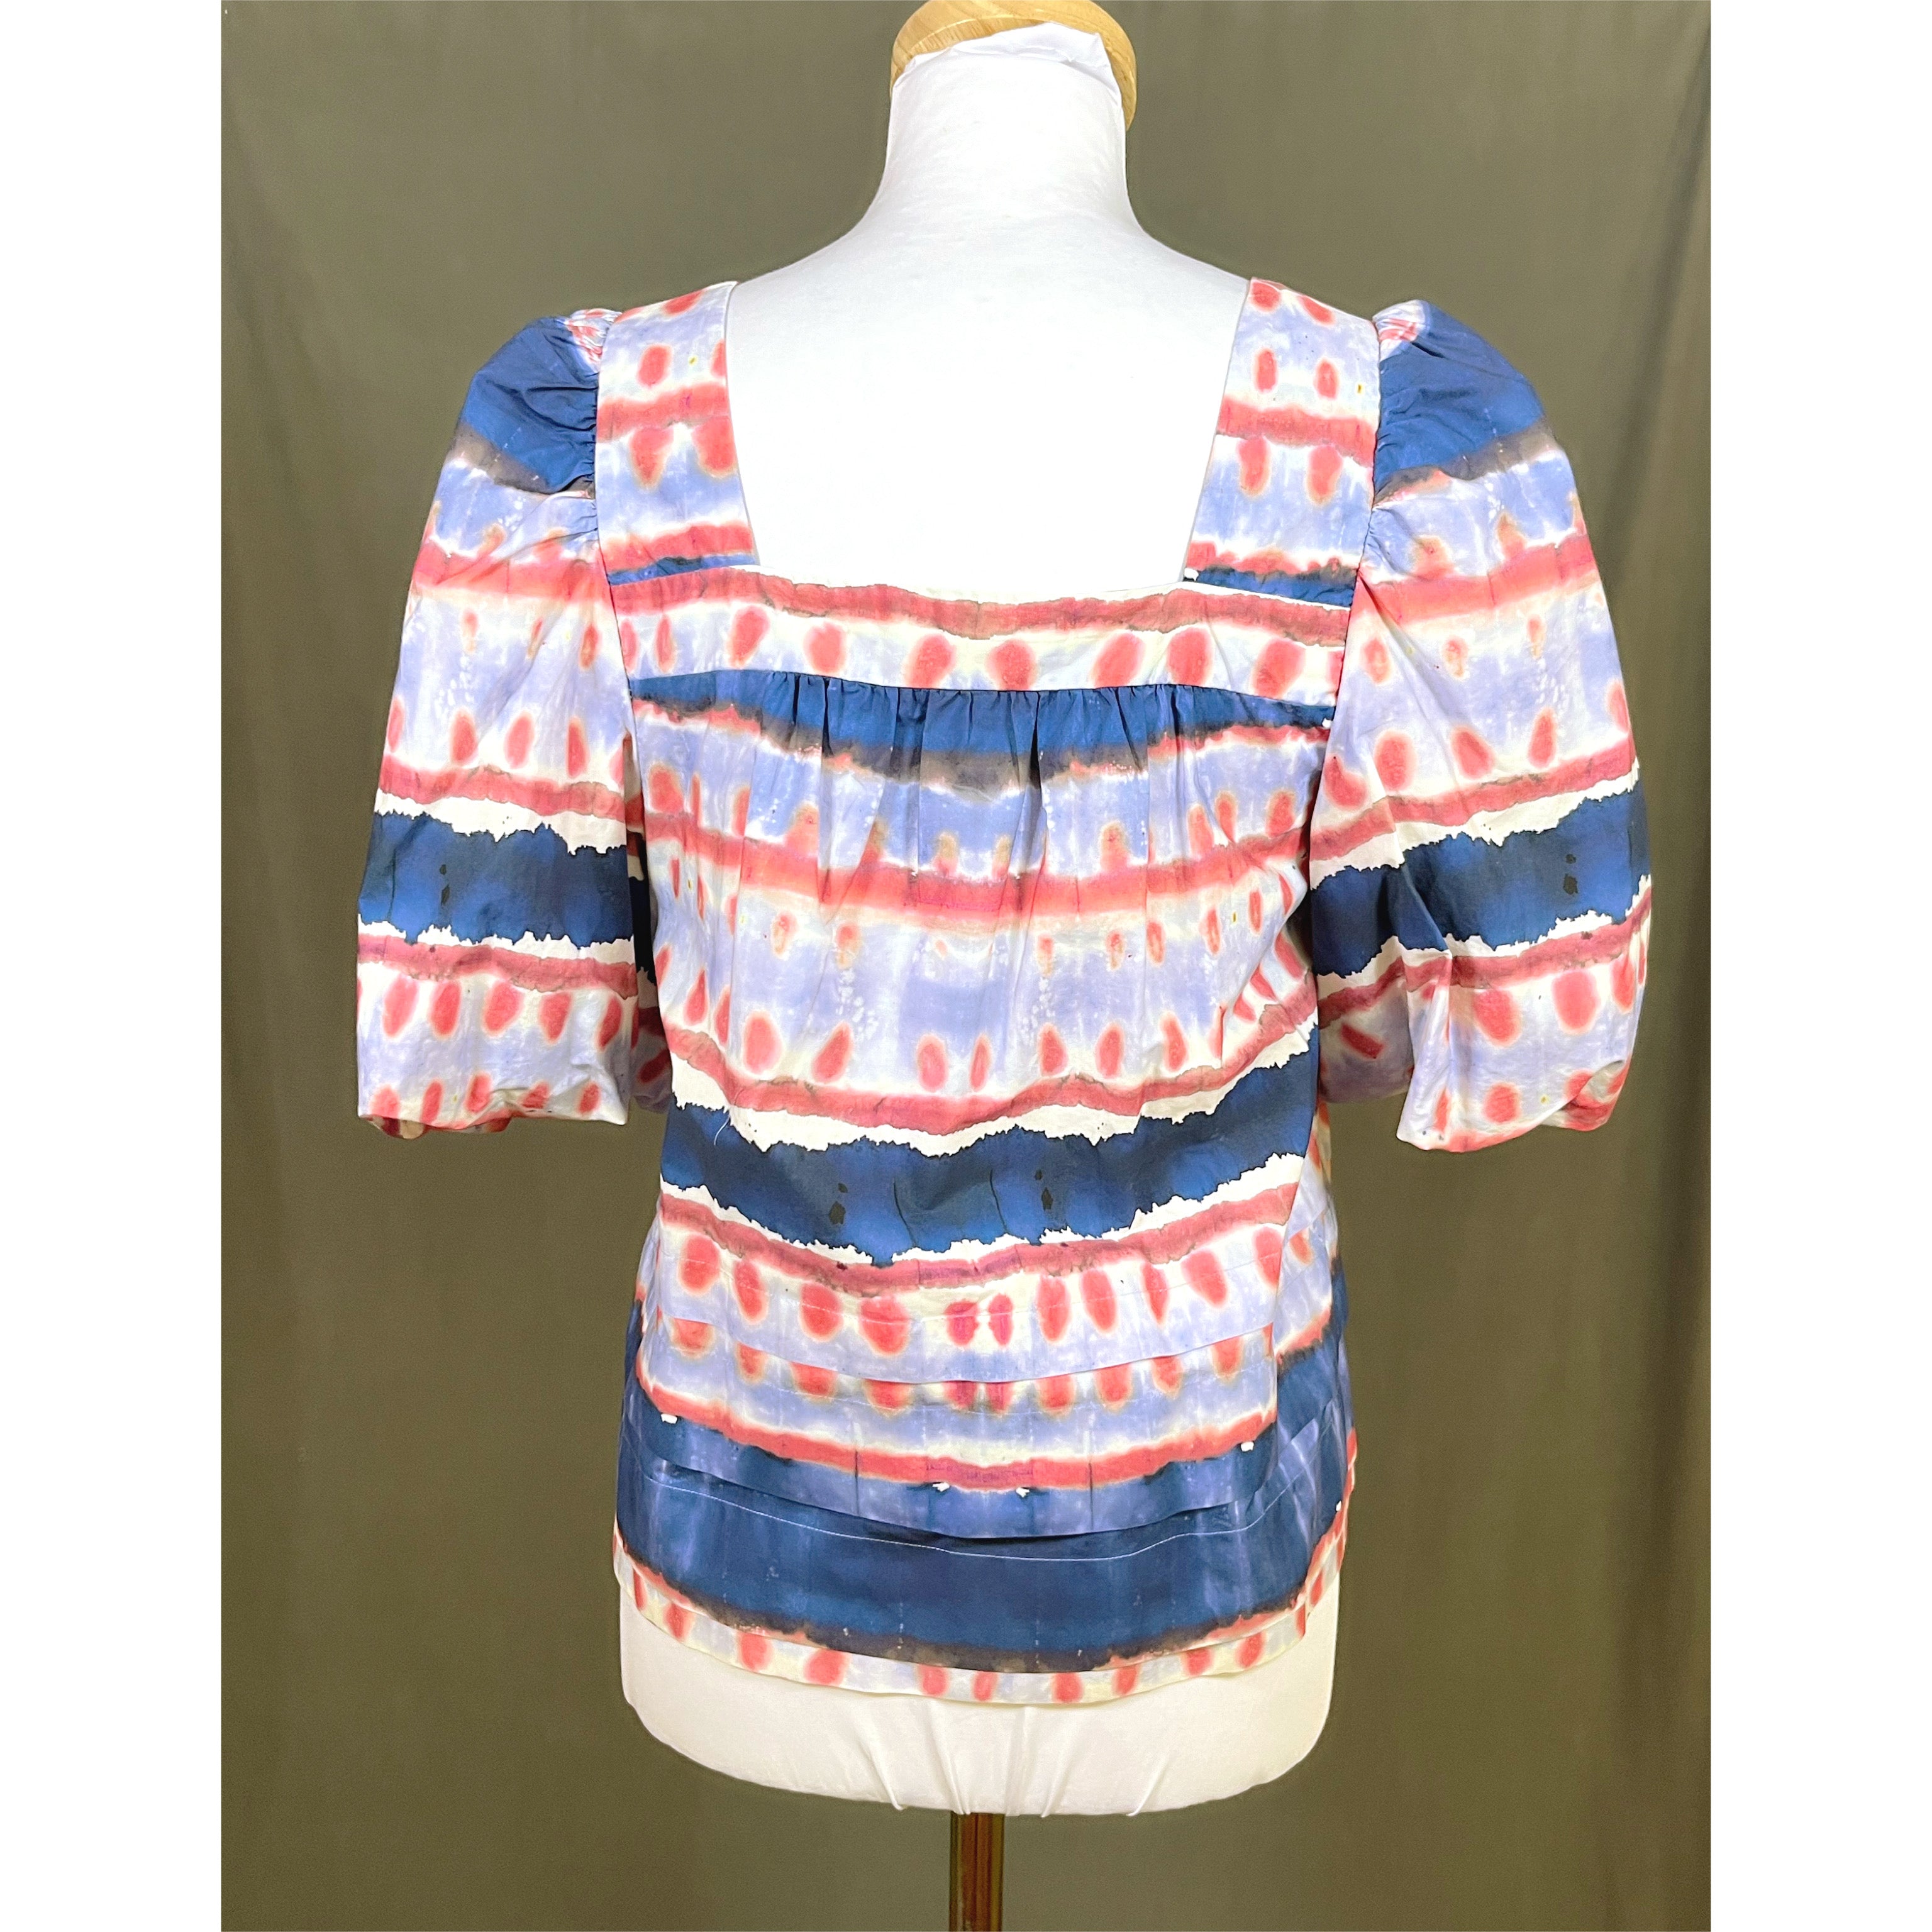 Marie Oliver blue and pink blouse, size M